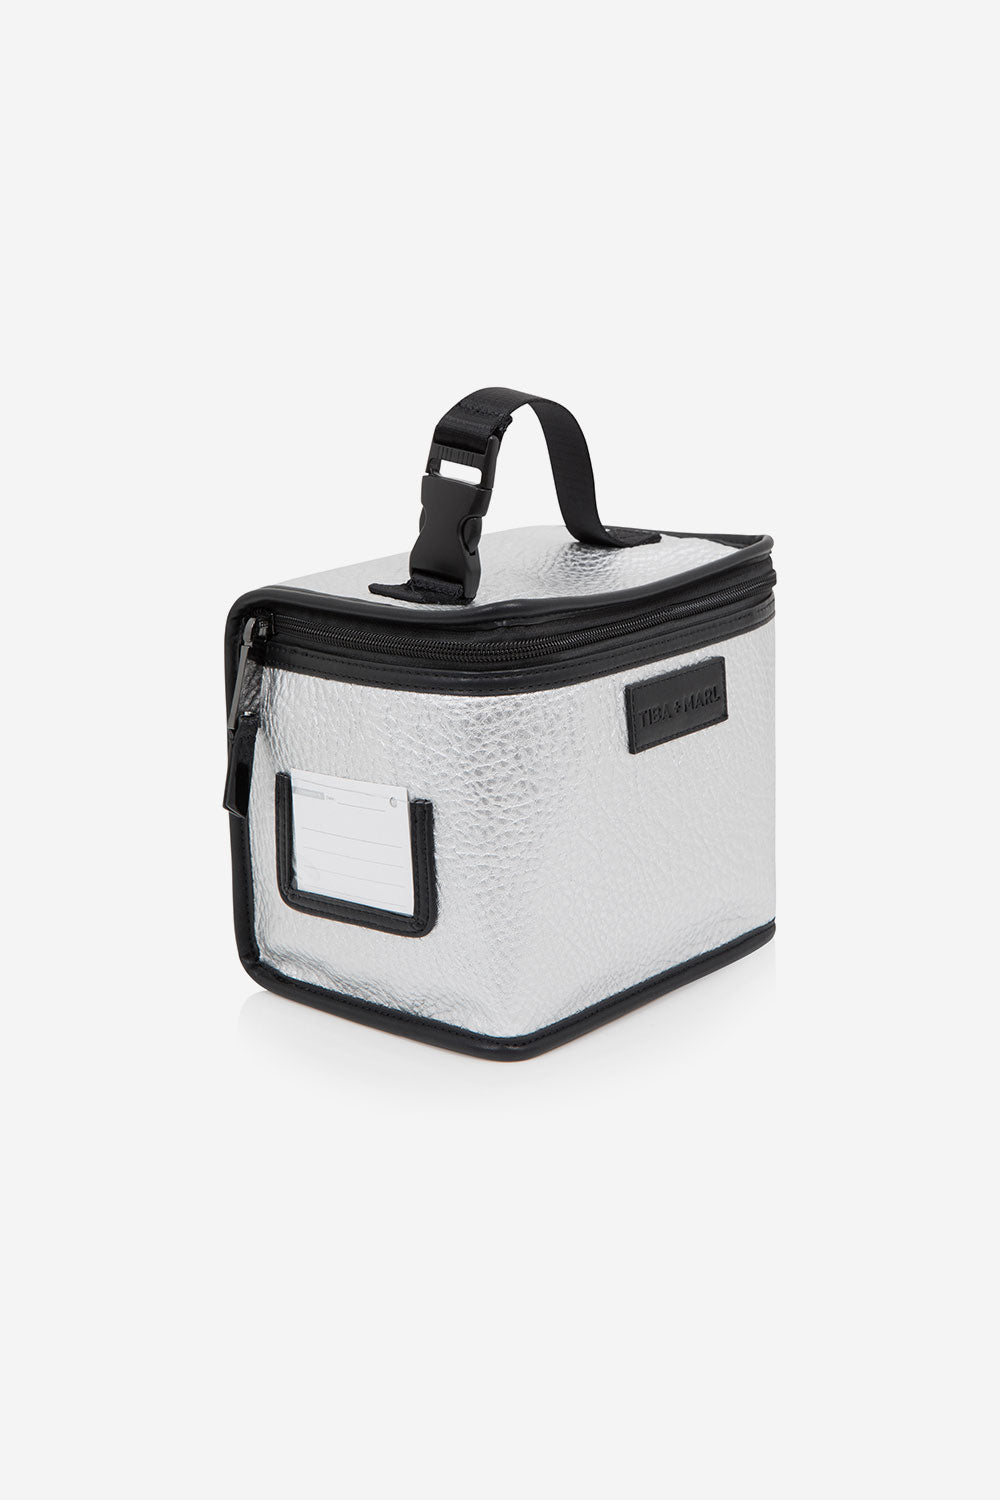 Arlo Lunch Bag / Snack Pack Silver